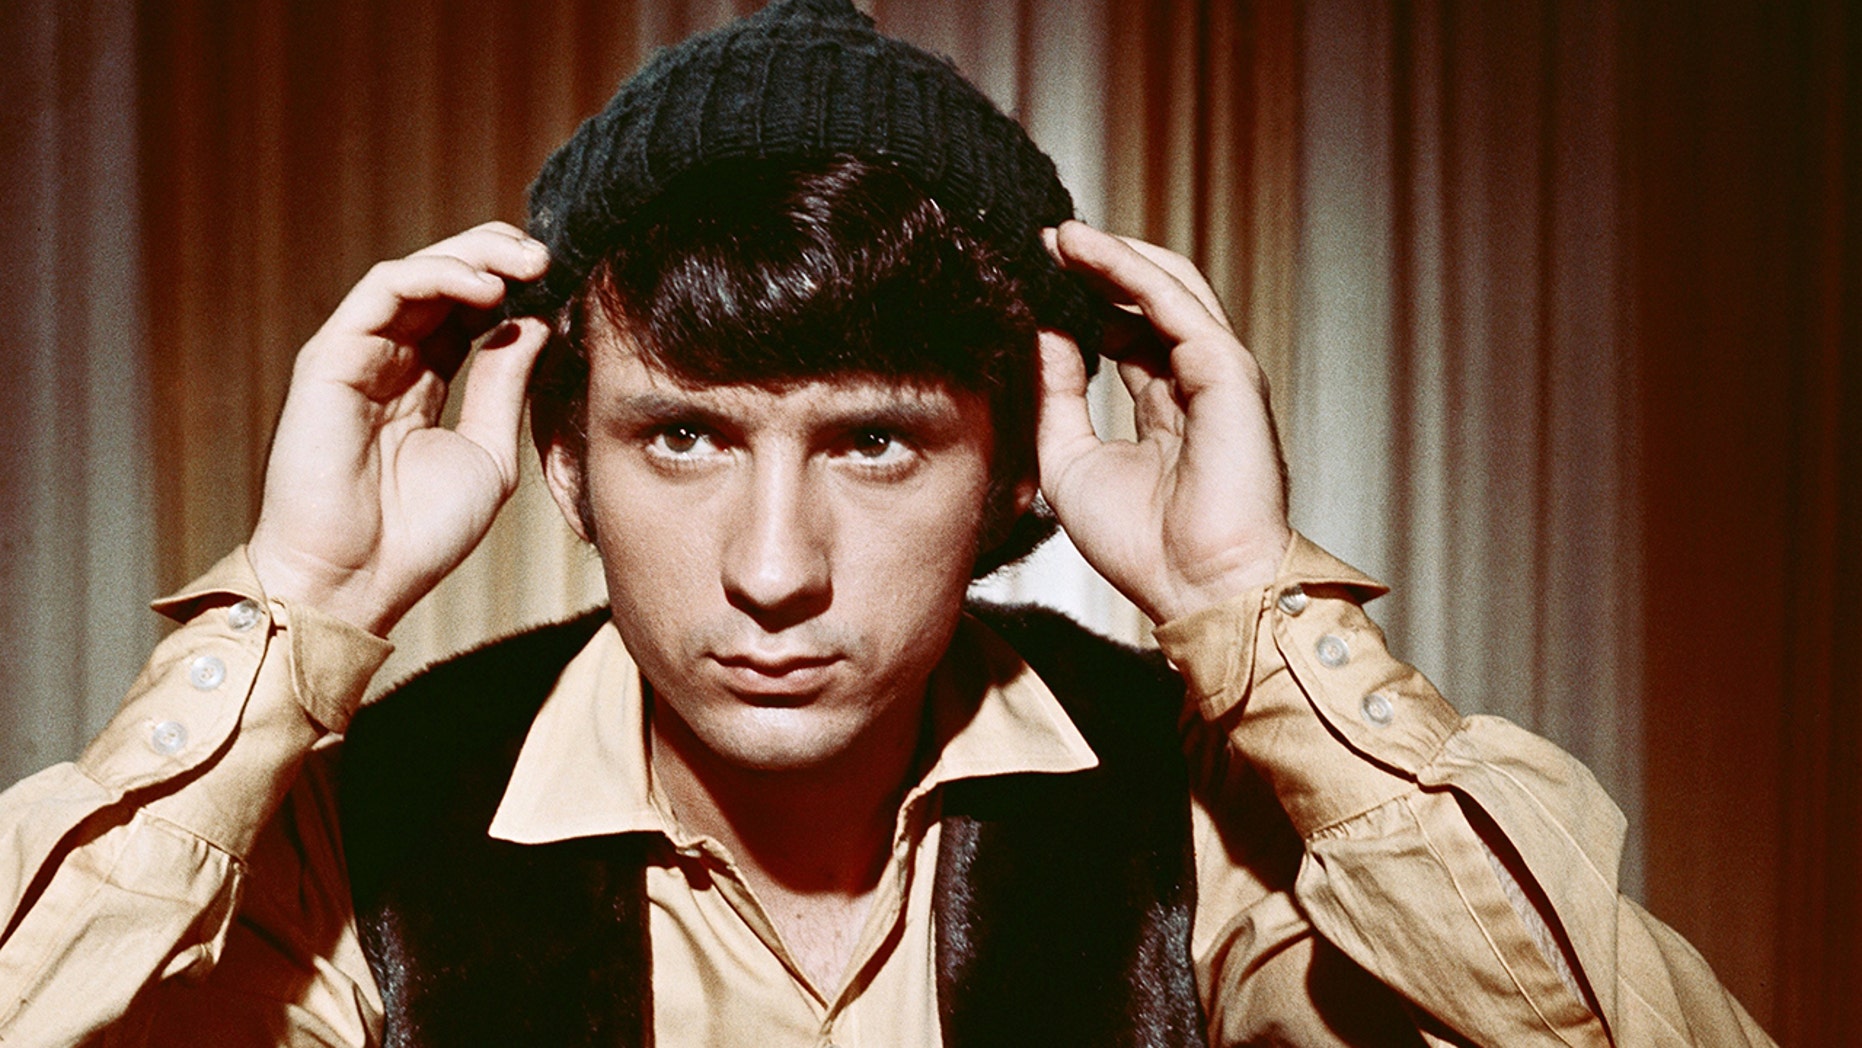 ‘Hey Hey One Less Monkees:’  Brother Michael Nesmith, 78, Cashed O